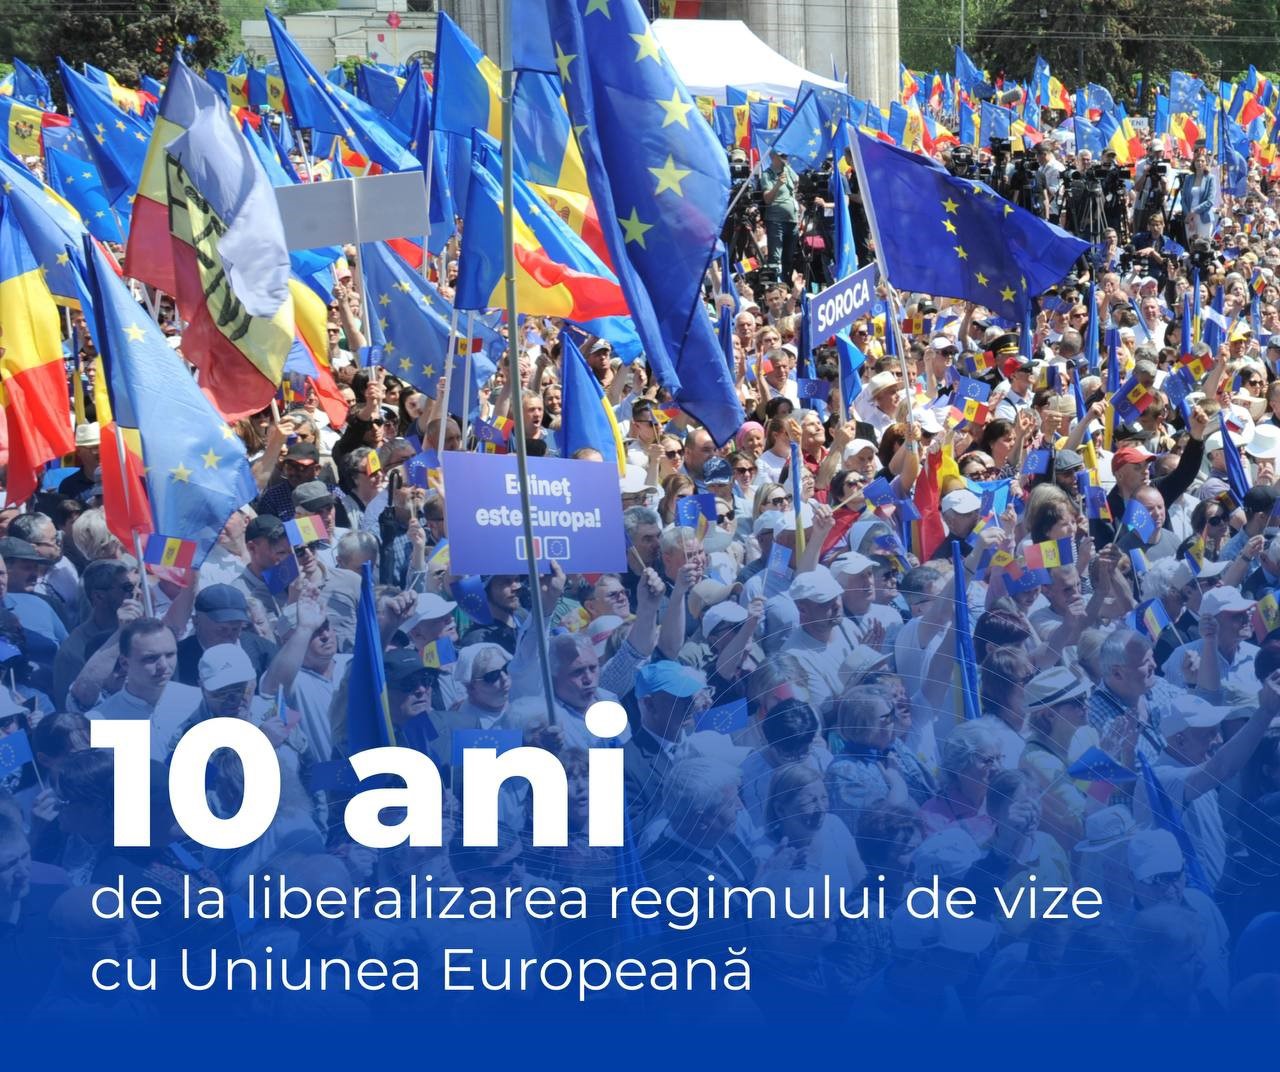 The Republic of Moldova marks 10 years of visa regime liberalization with the EU. Maia Sandu: "Moldovans are Europeans and deserve to live freely, to travel where they want"